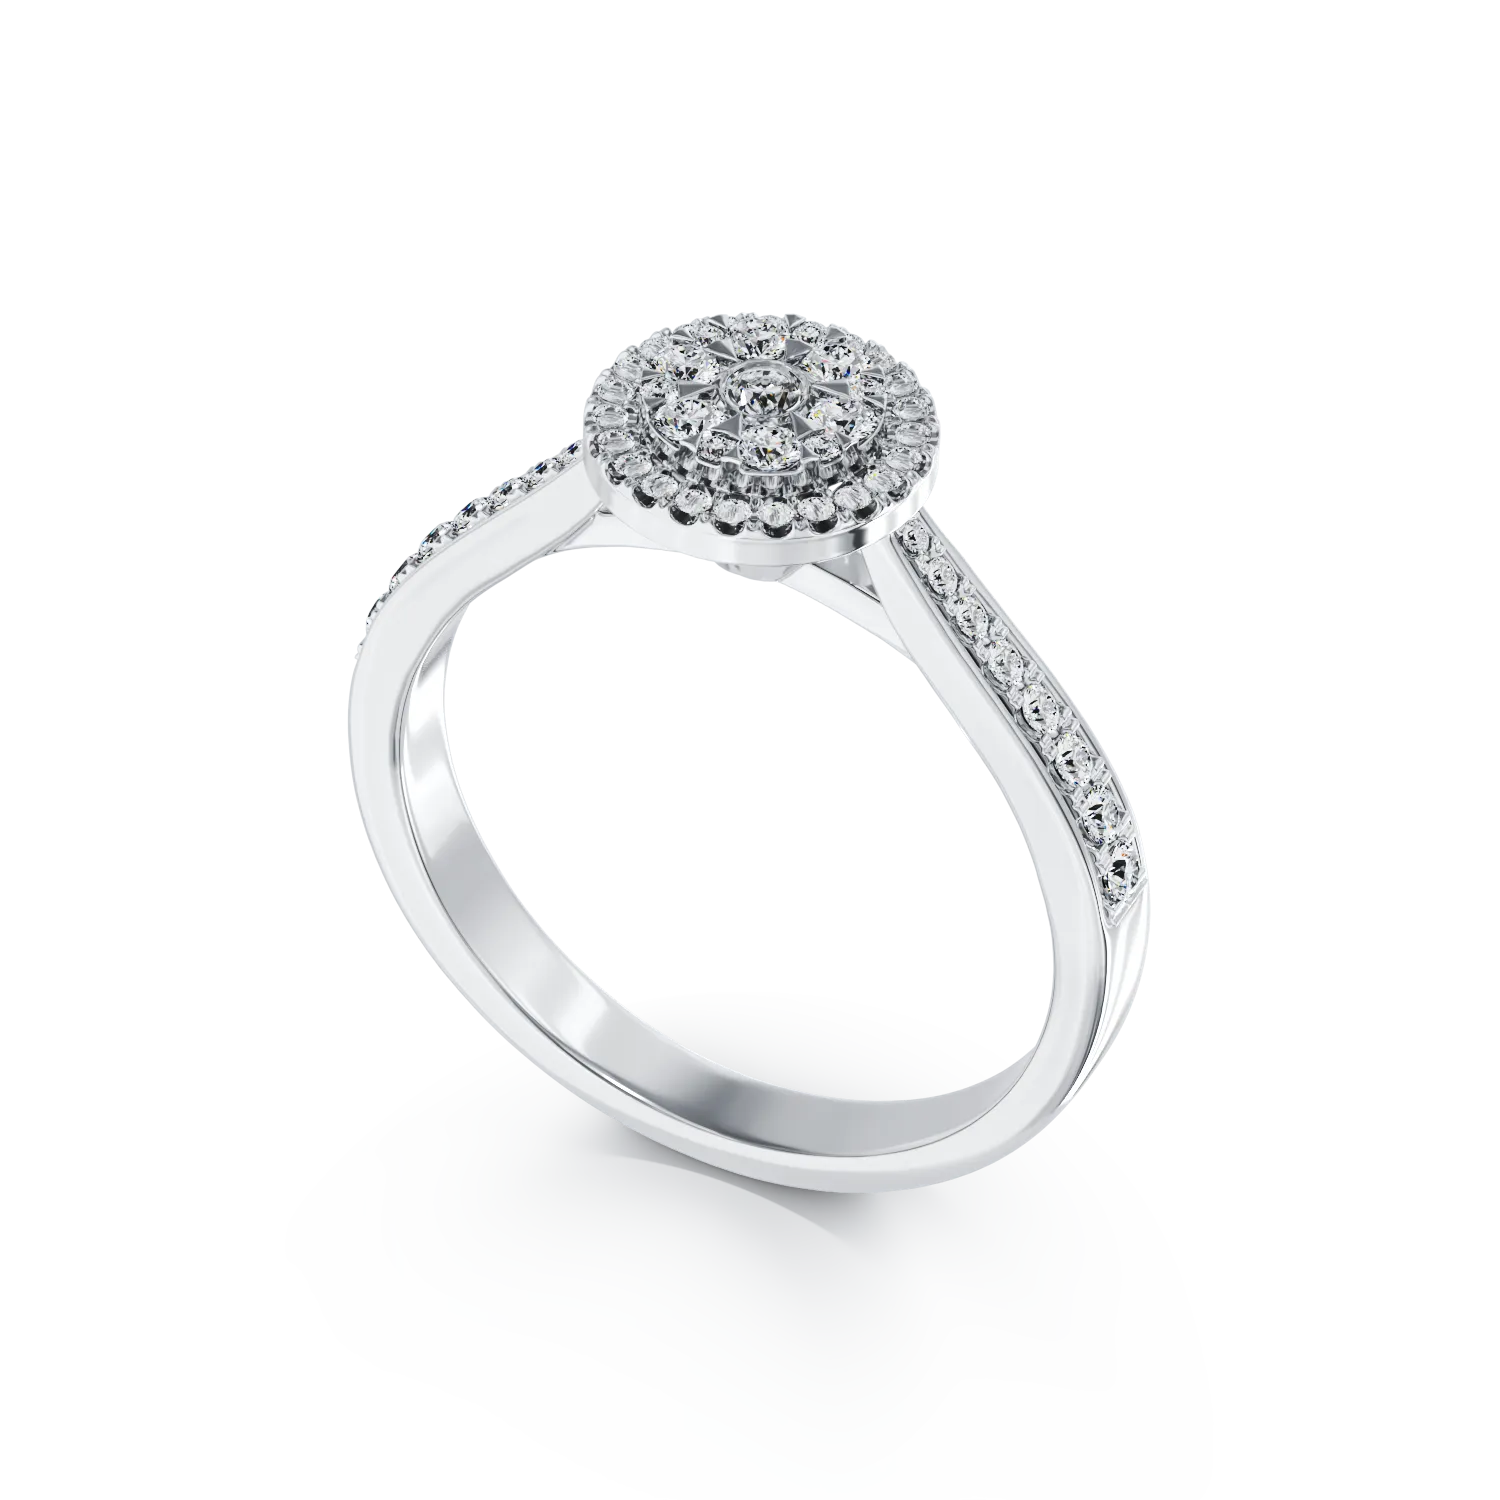 18K white gold engagement ring with 0.437ct diamonds